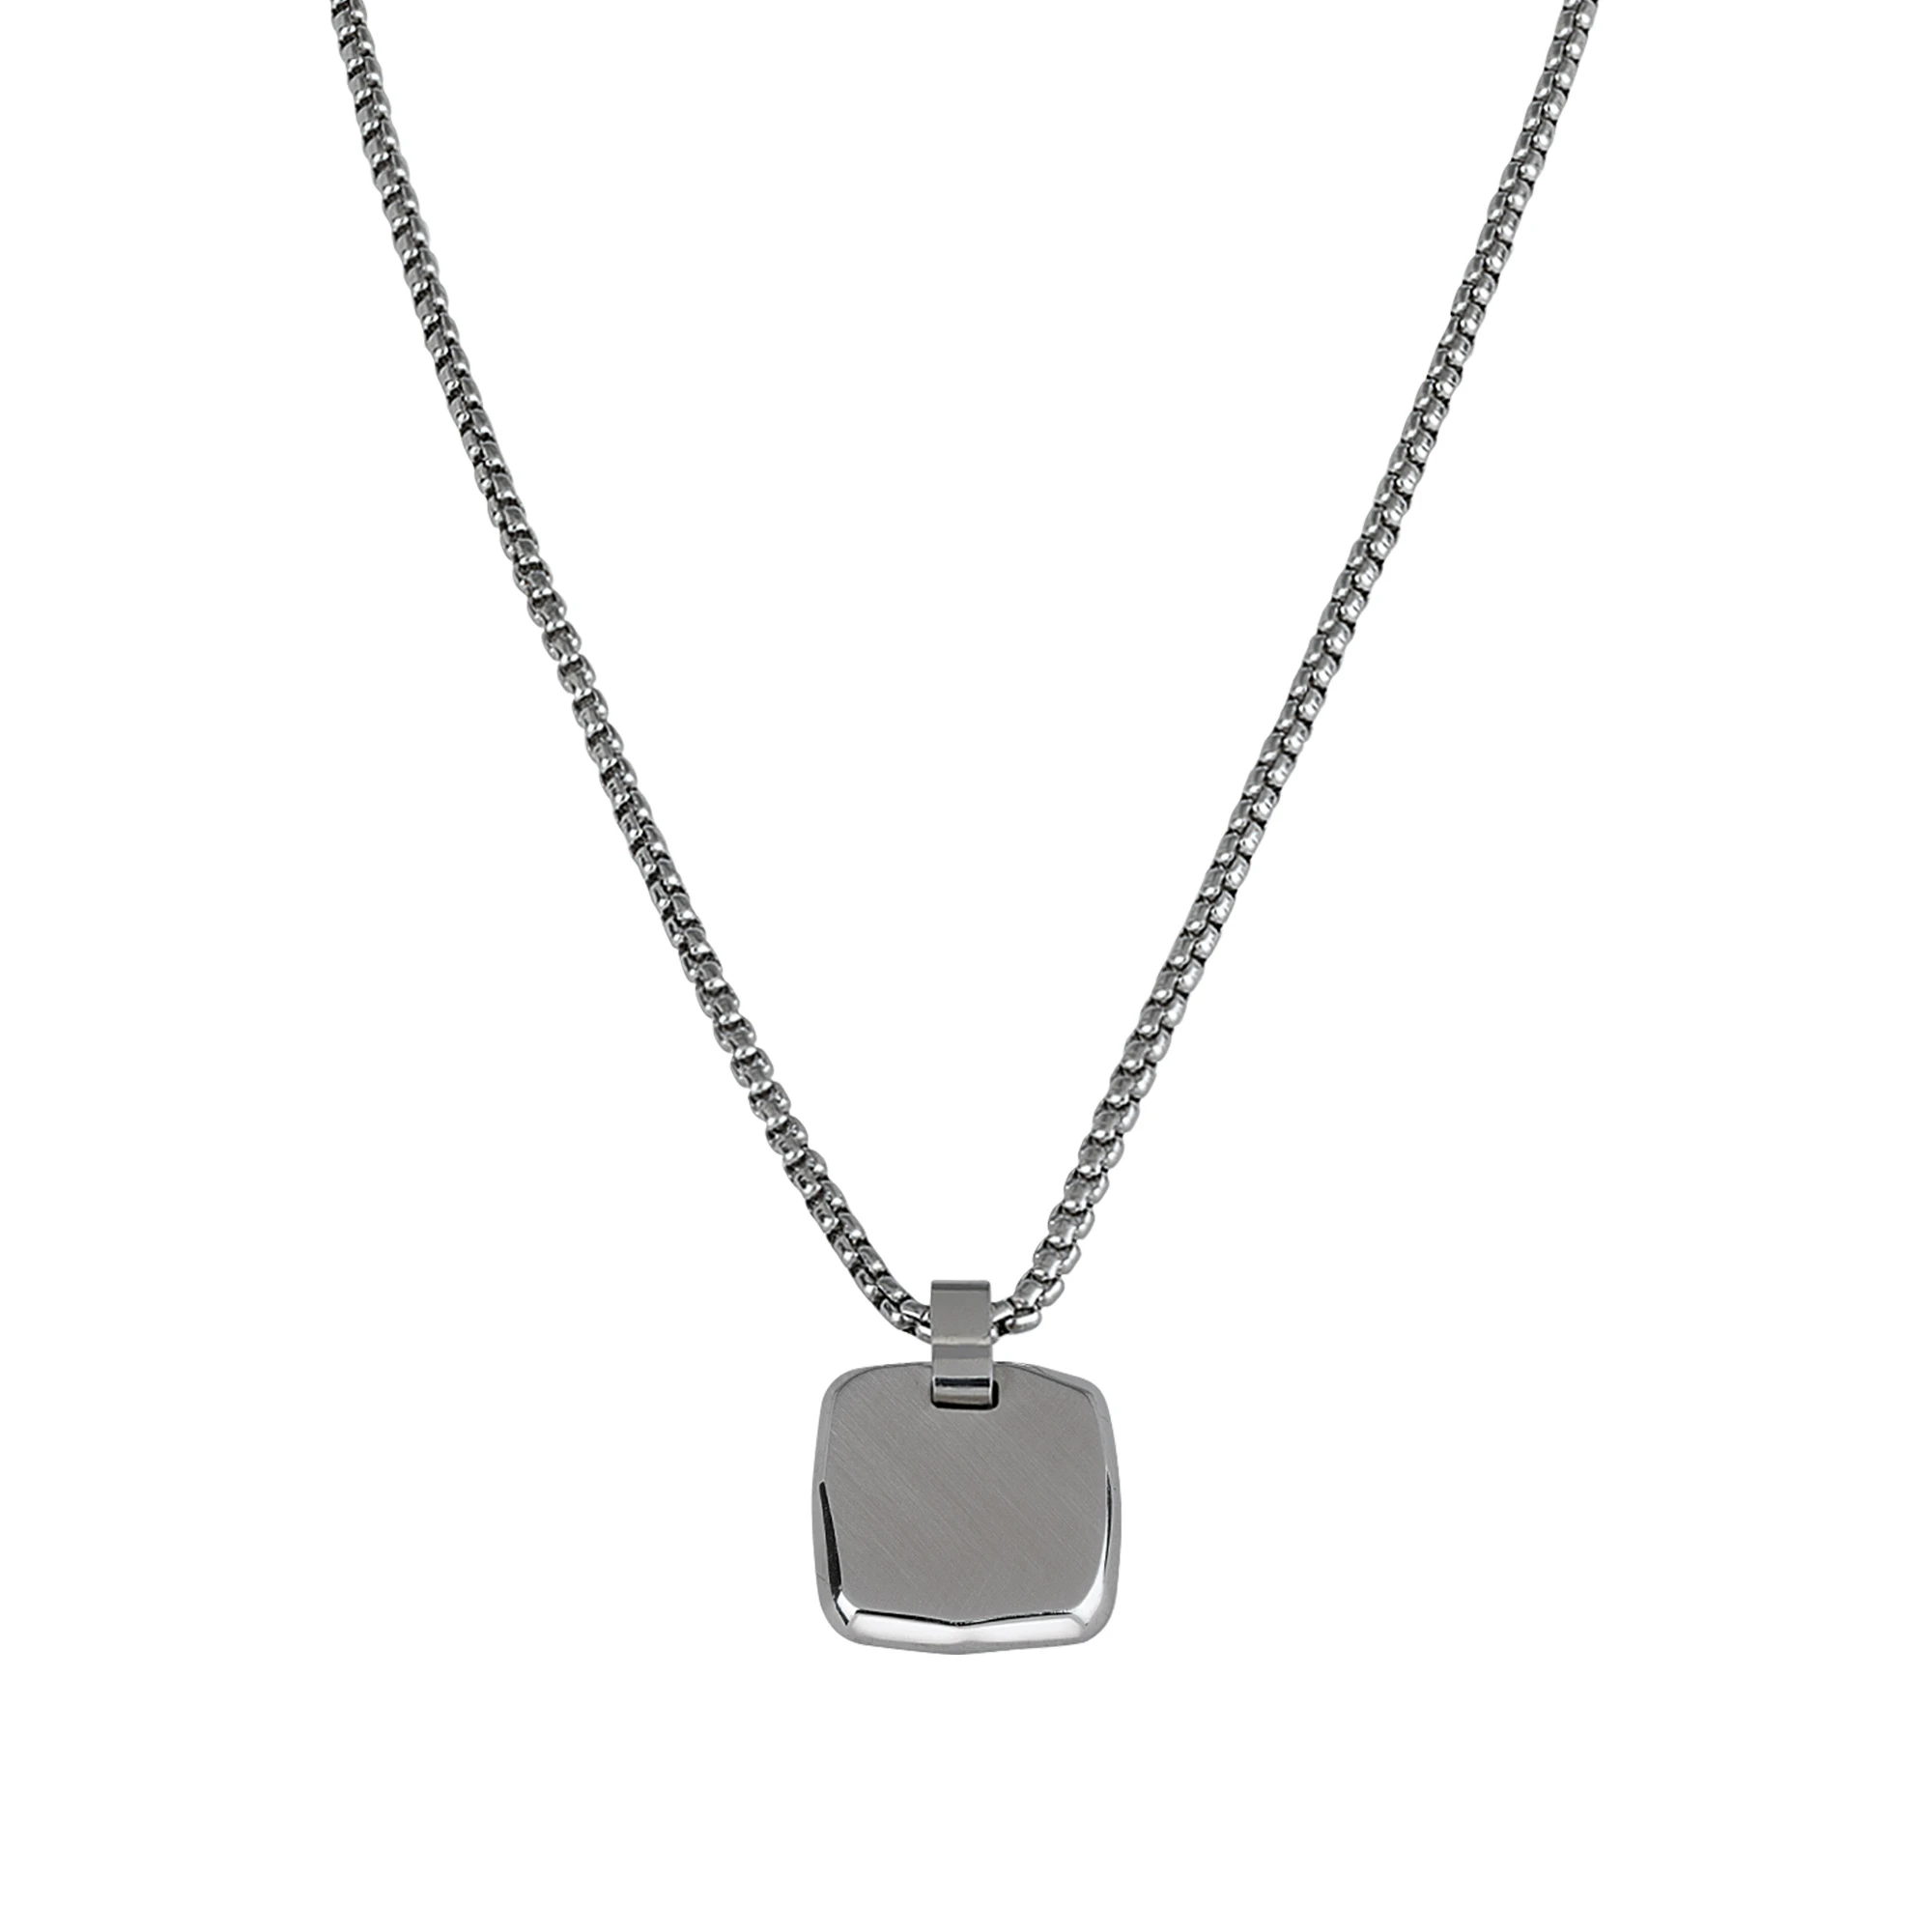 B SEAL - STEEL NECKLACE WITH CUSTOMIZABLE TAG - 1 - TJ2952 | Breil